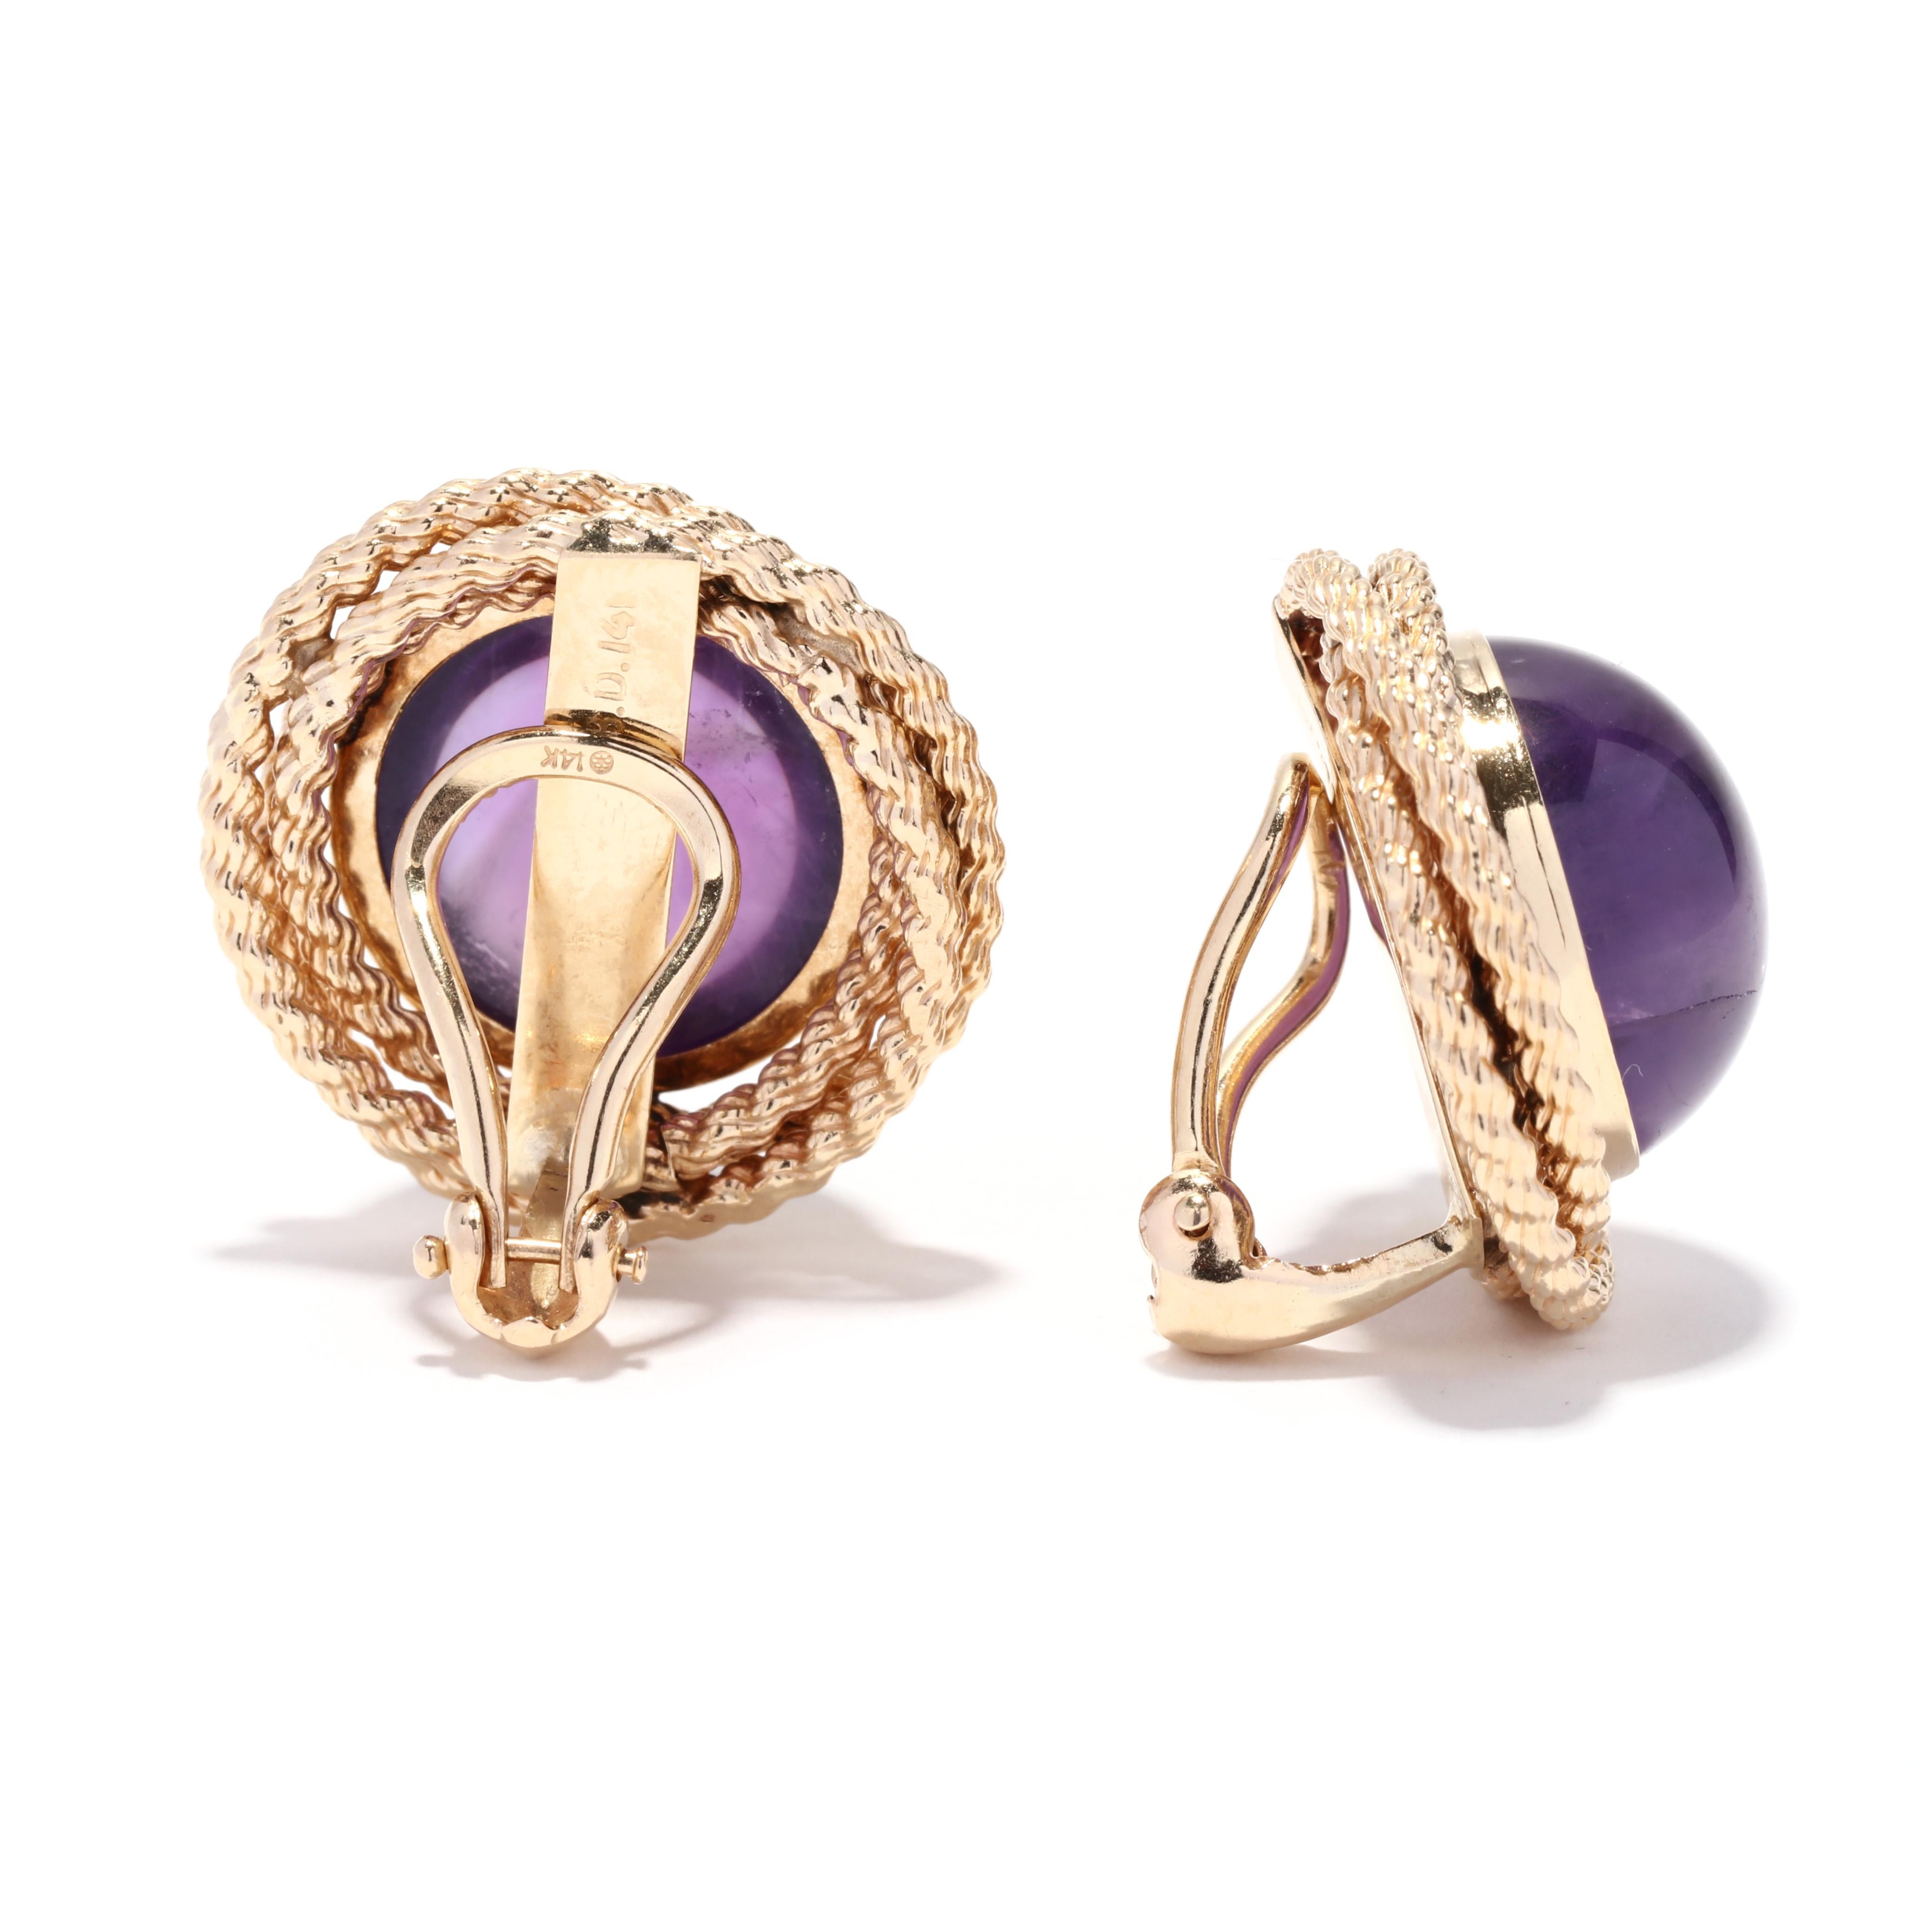 A pair of vintage 14 karat yellow gold amethyst knot clip on earrings. These earrings feature bezel set, round cabochon cut amethyst stones weighing approximately 23 total carats with a twisted rope motif border and with omega clip backs.

Stones:
-